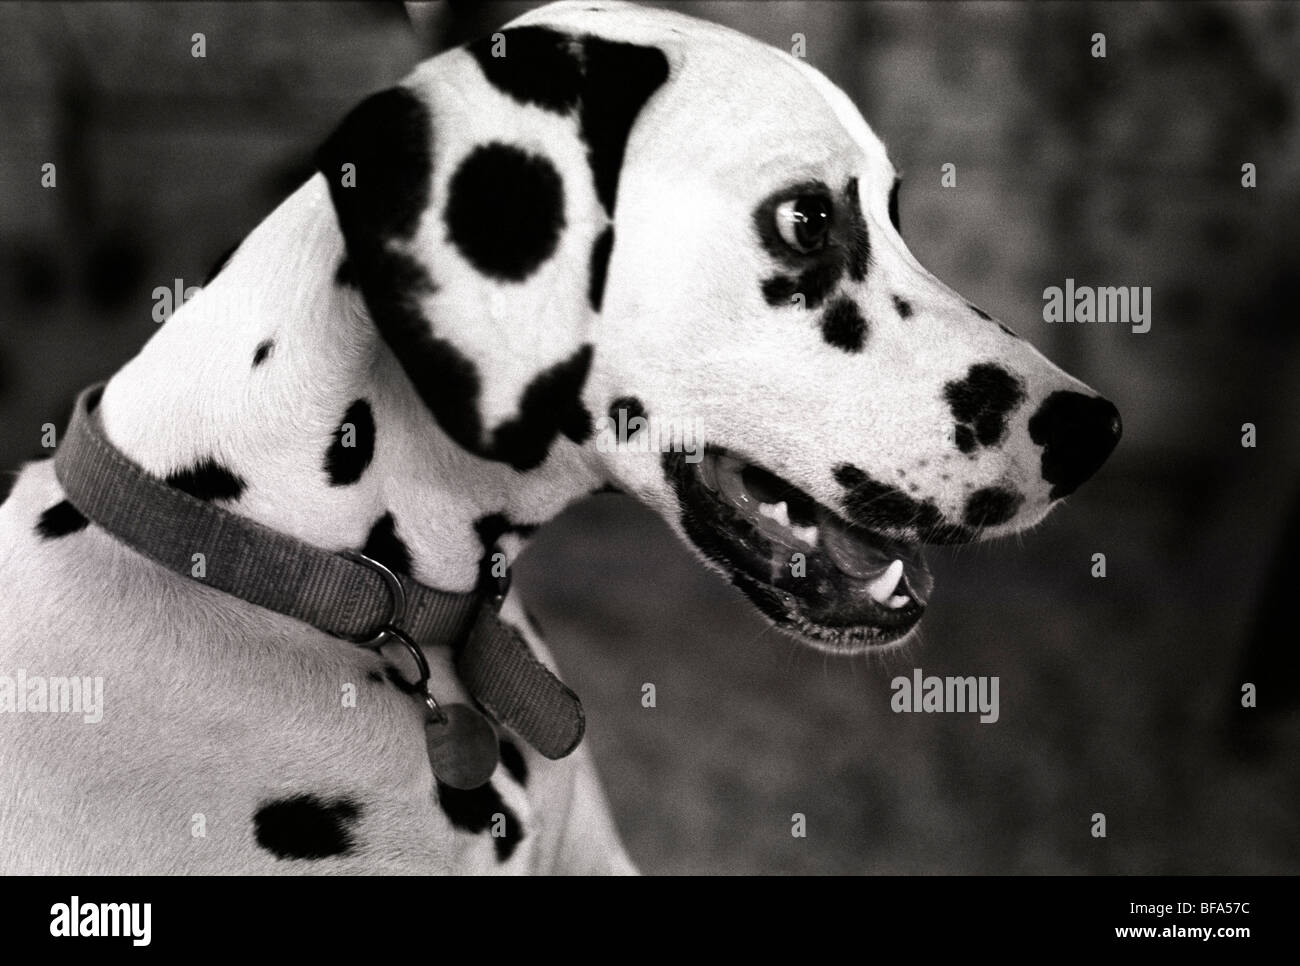 A dalmatian dog at Crufts the UKs premier dog show waiting for a command from its owner competing in the obedience trials Stock Photo